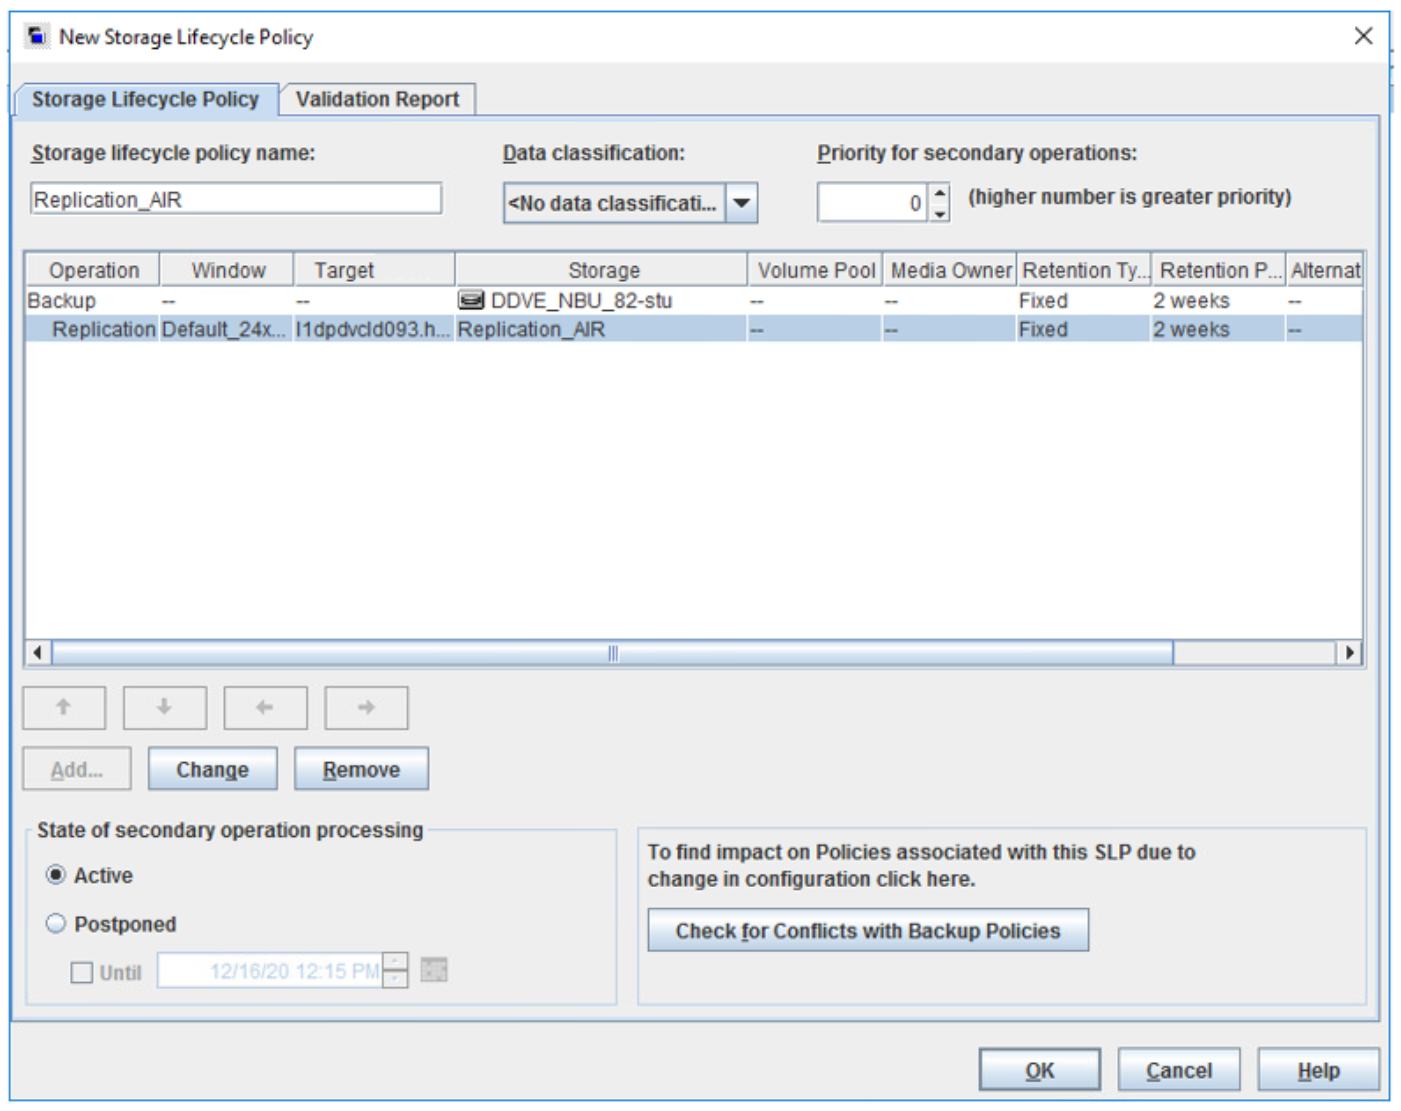 The image shows the Backup and Replication operation details and to save the SLP